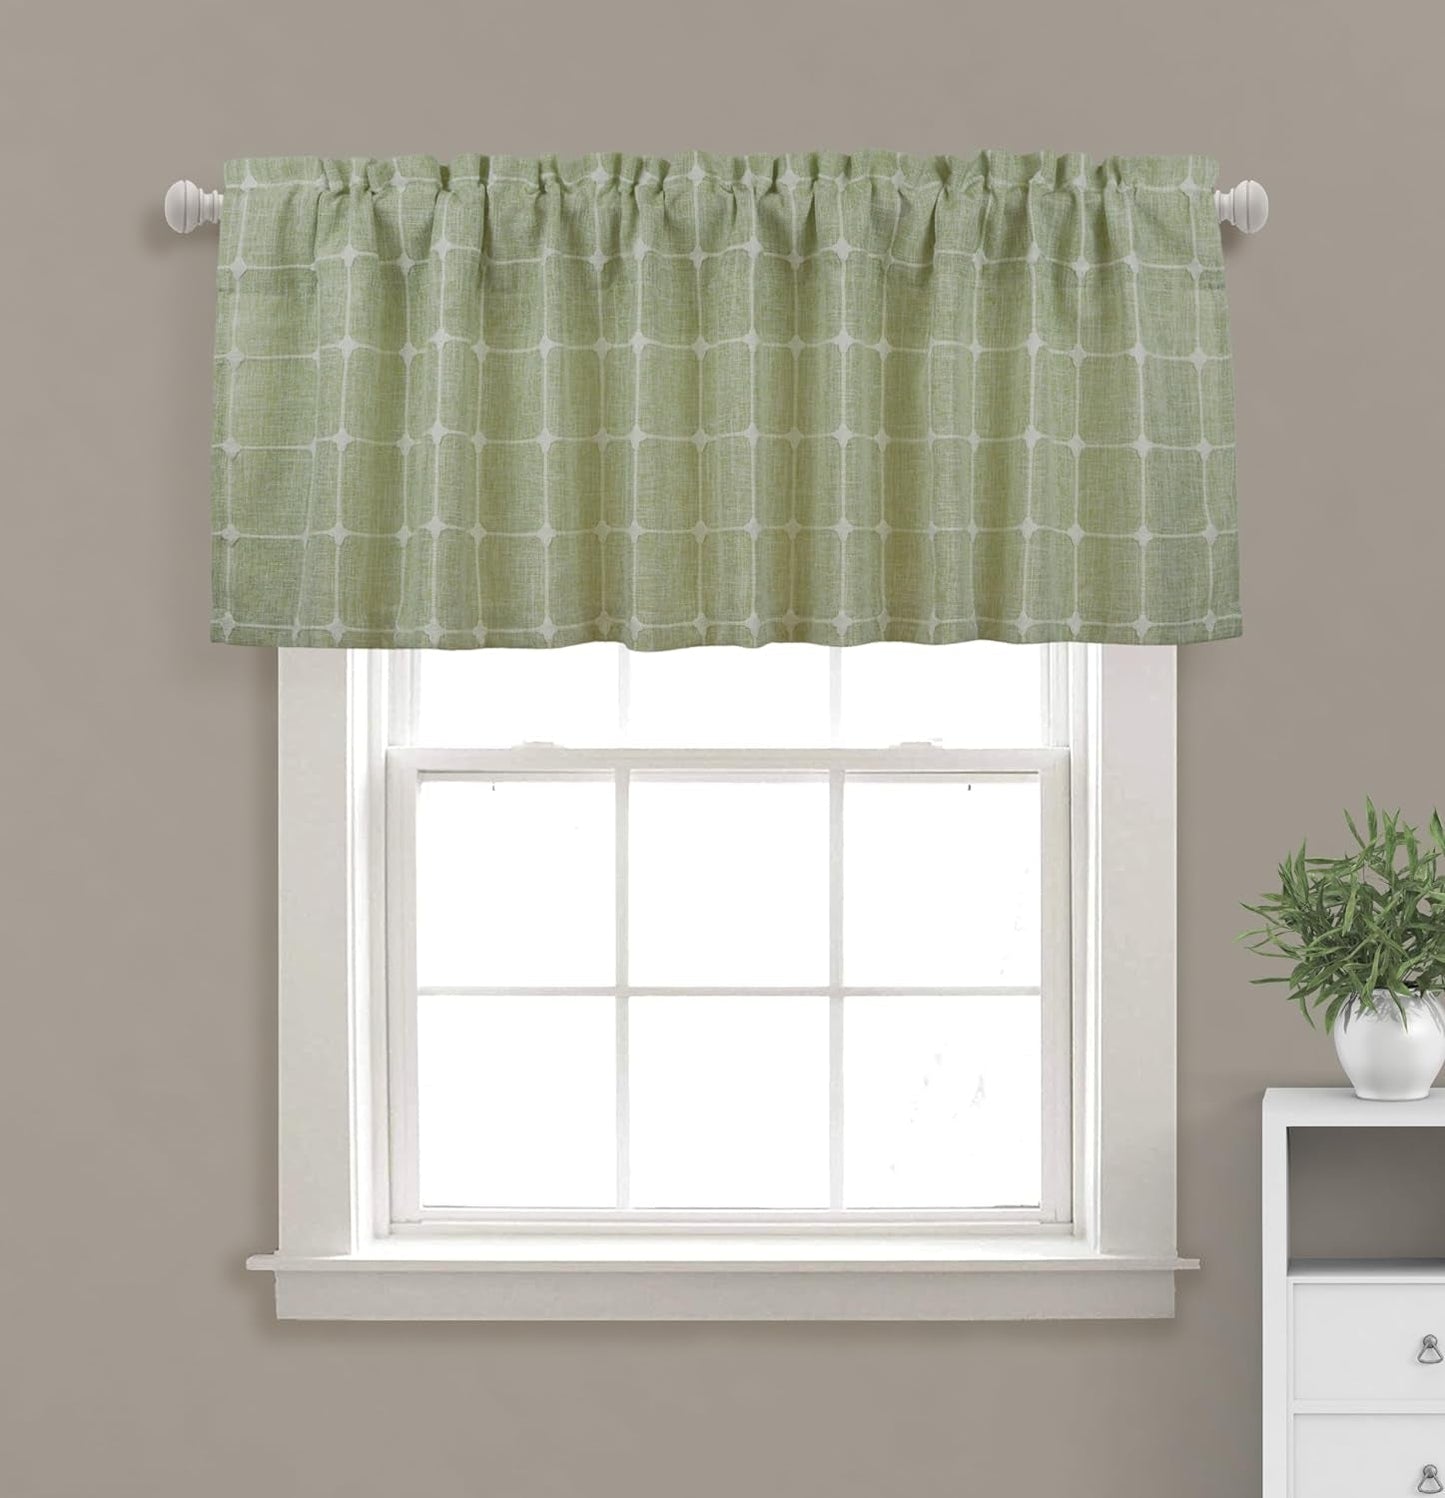 Aiking 2 Panels of Plaid Embroidered 16 Inch Length Rod Pocket Window Valances (56 in by 16 In/Each Panel, Beige)